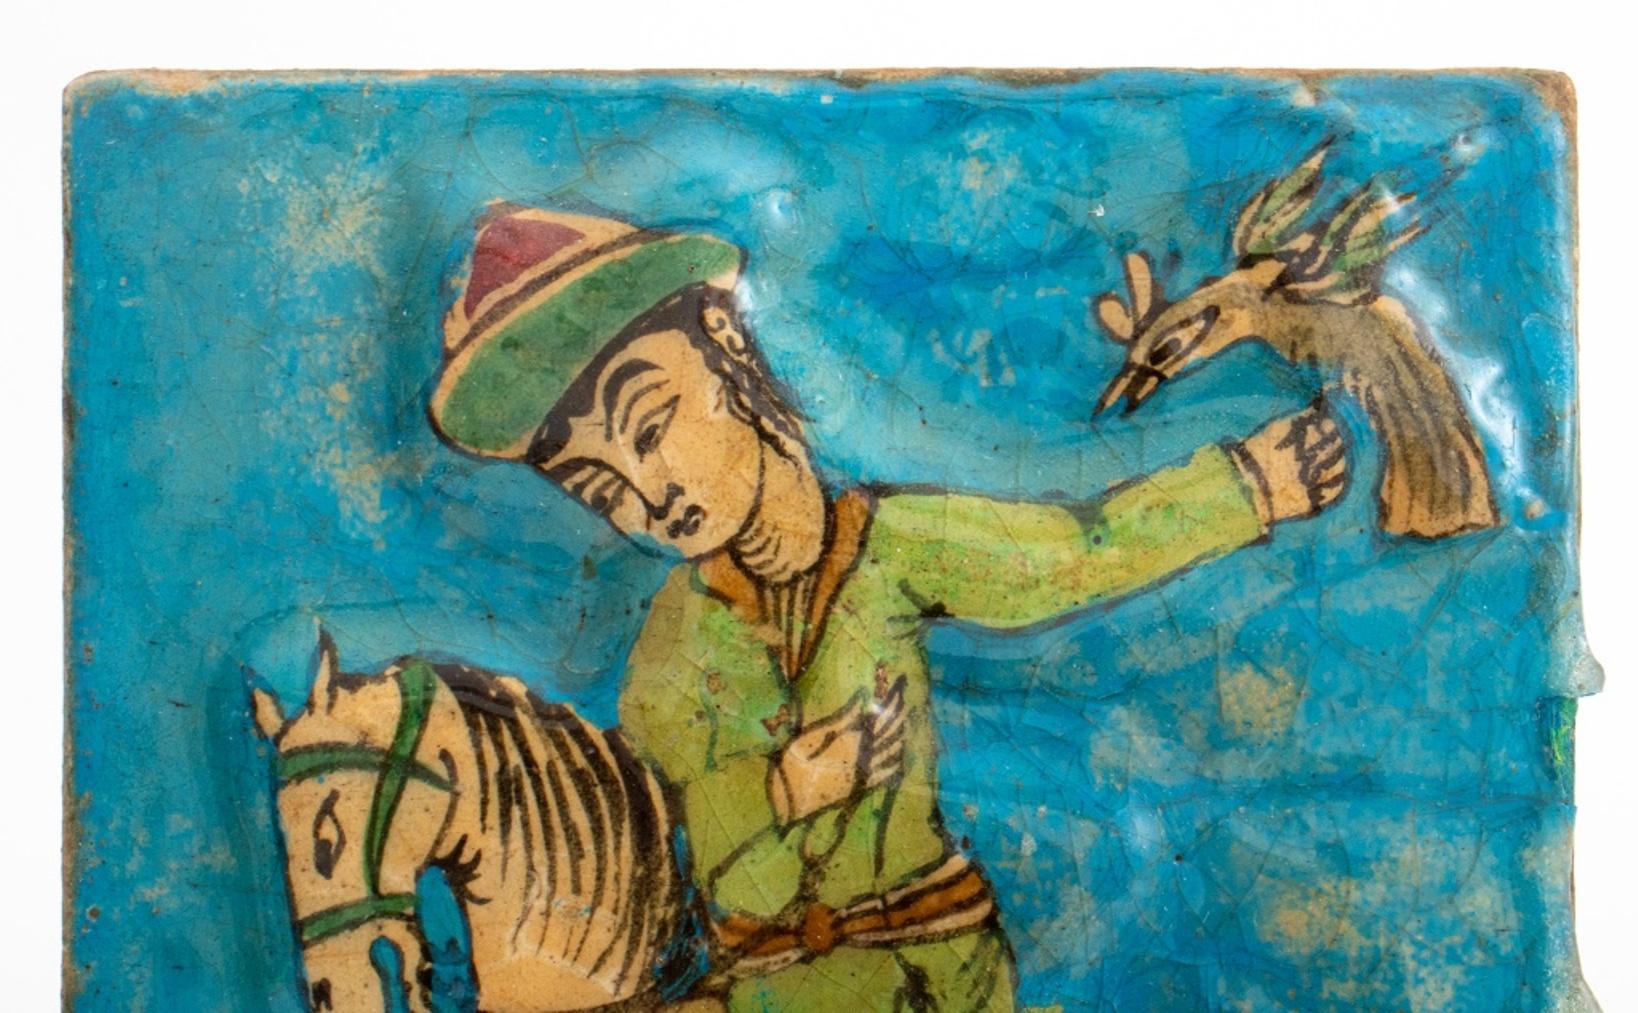 Persian Qajar glazed tile, 19th c., and depicting a Bazdar, or falconer, n horseback, a spotted hunting dog running at his feet on a turquoise ground.

Dimensions: 9.5